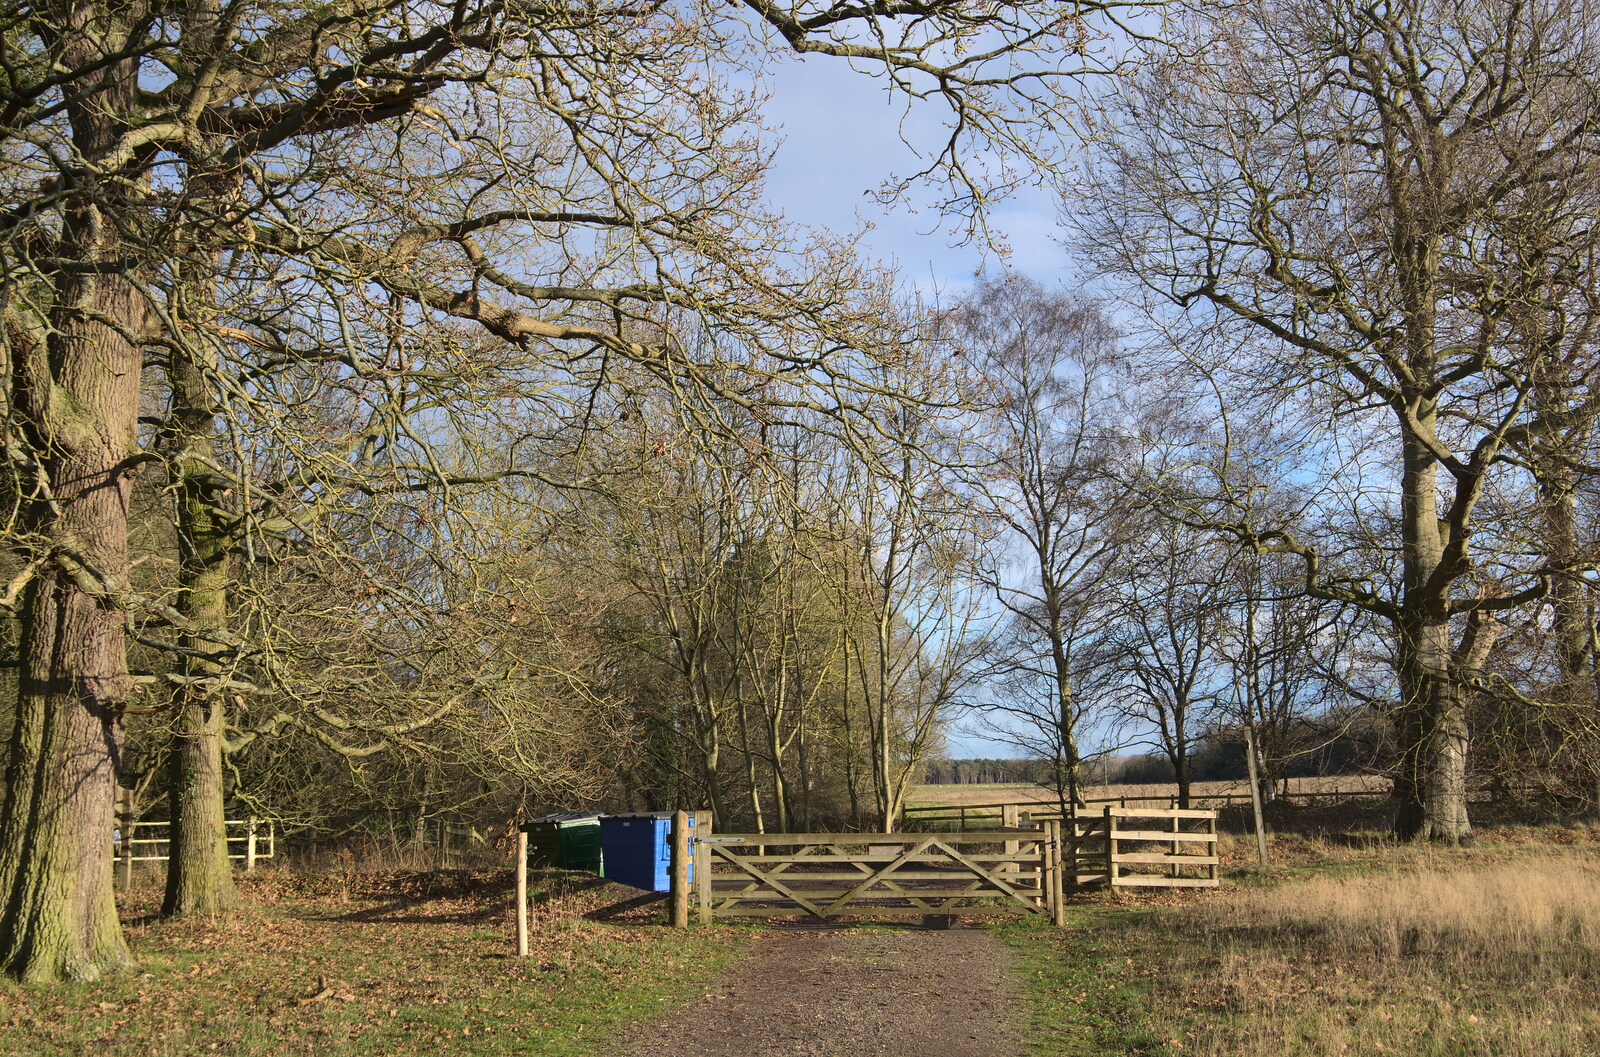 More bare trees and a gate from A Walk Around Knettishall Heath, Thetford, Norfolk - 2nd January 2022